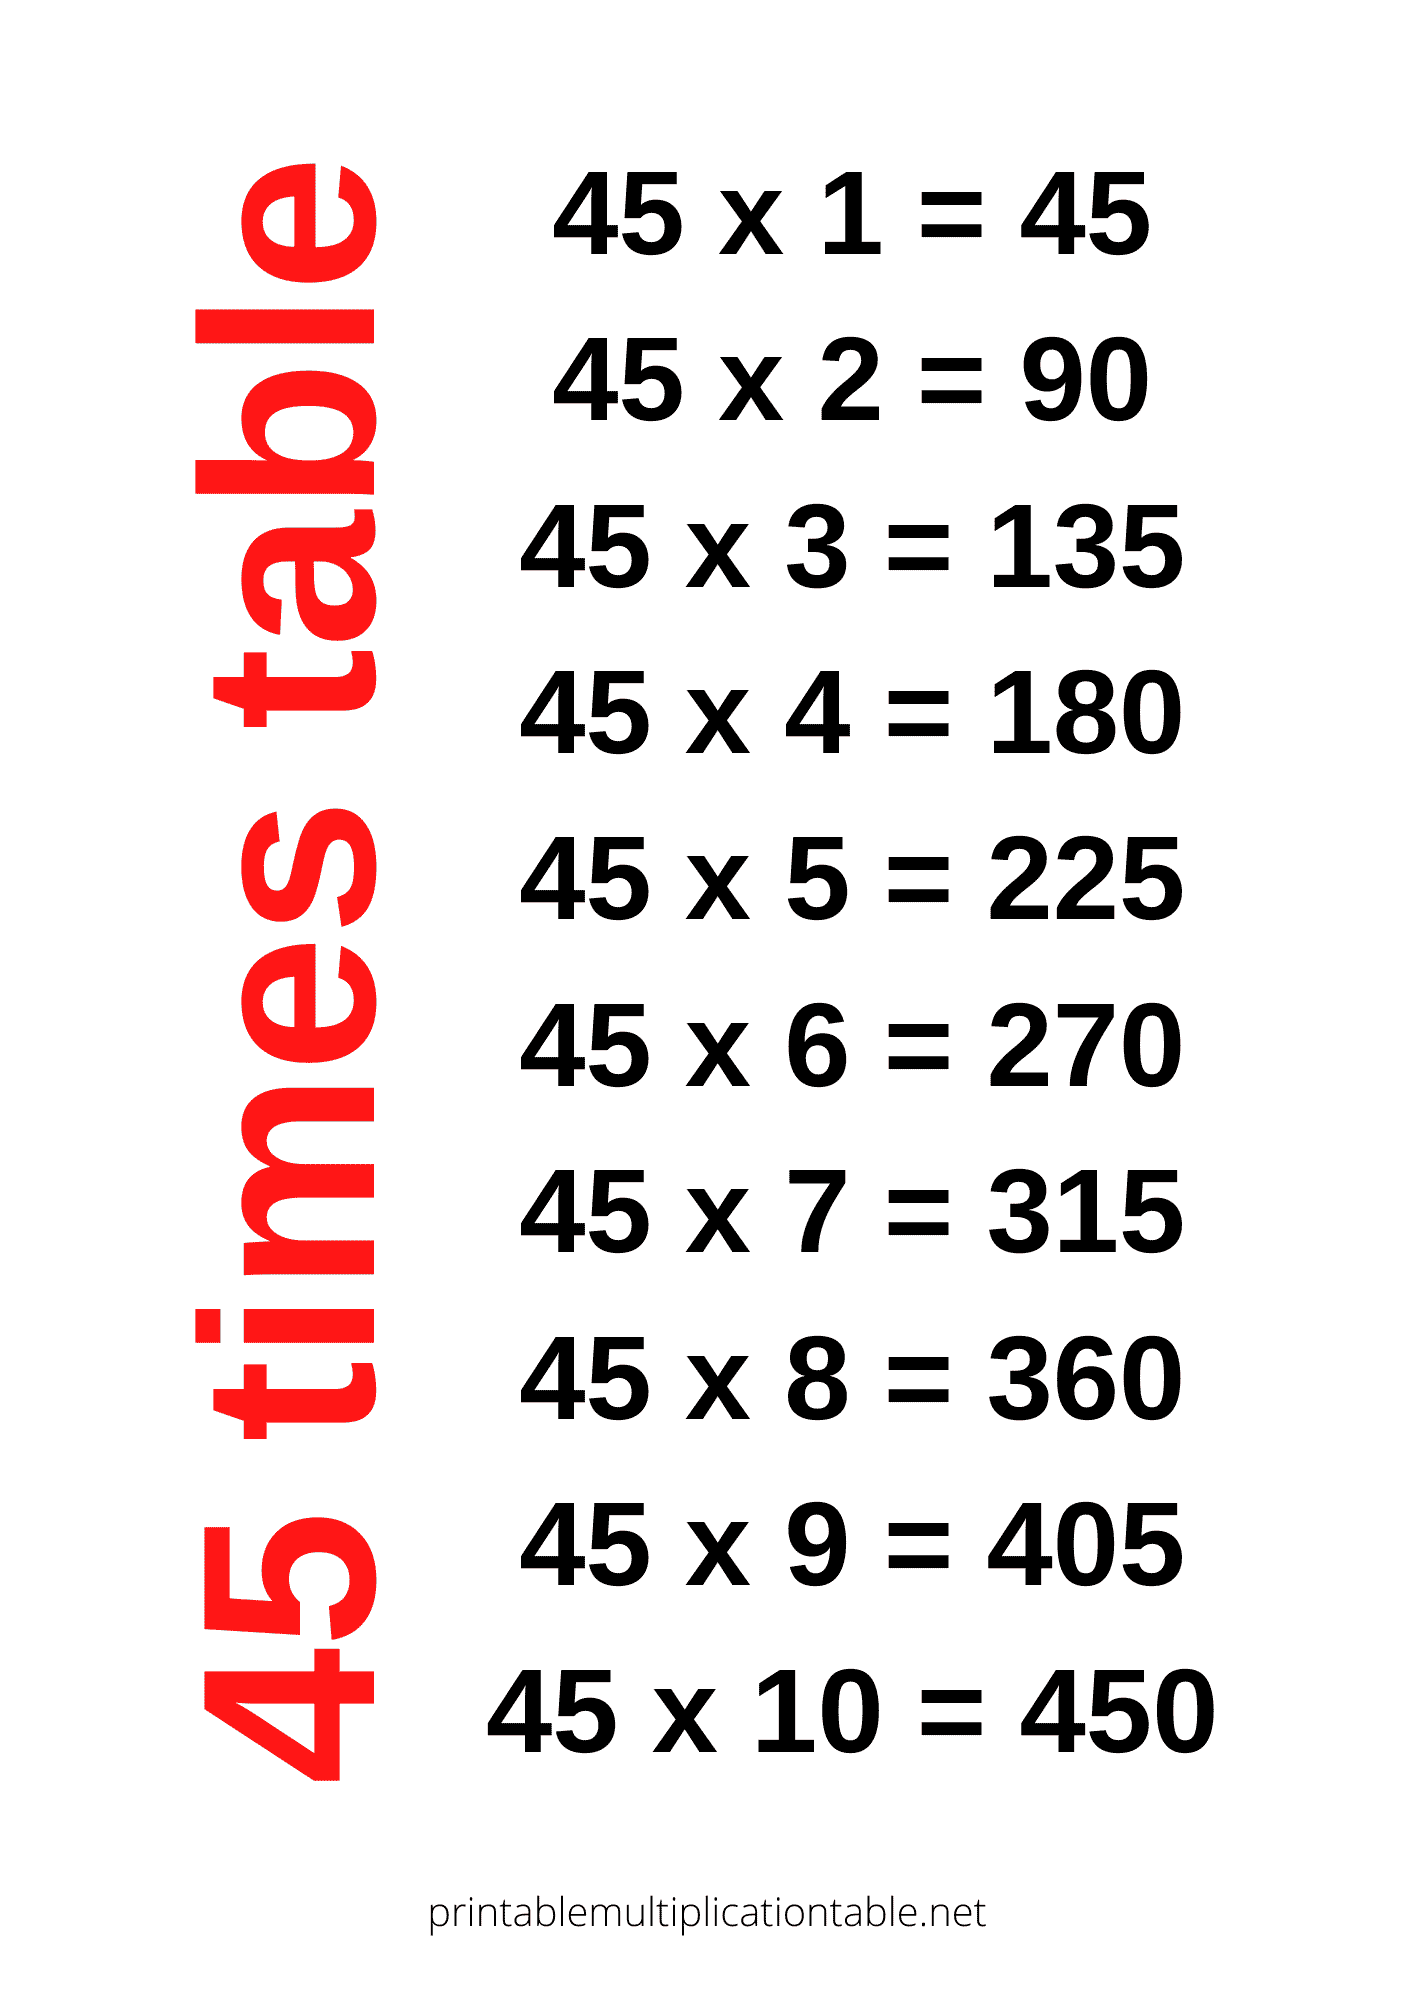 45 times table chart